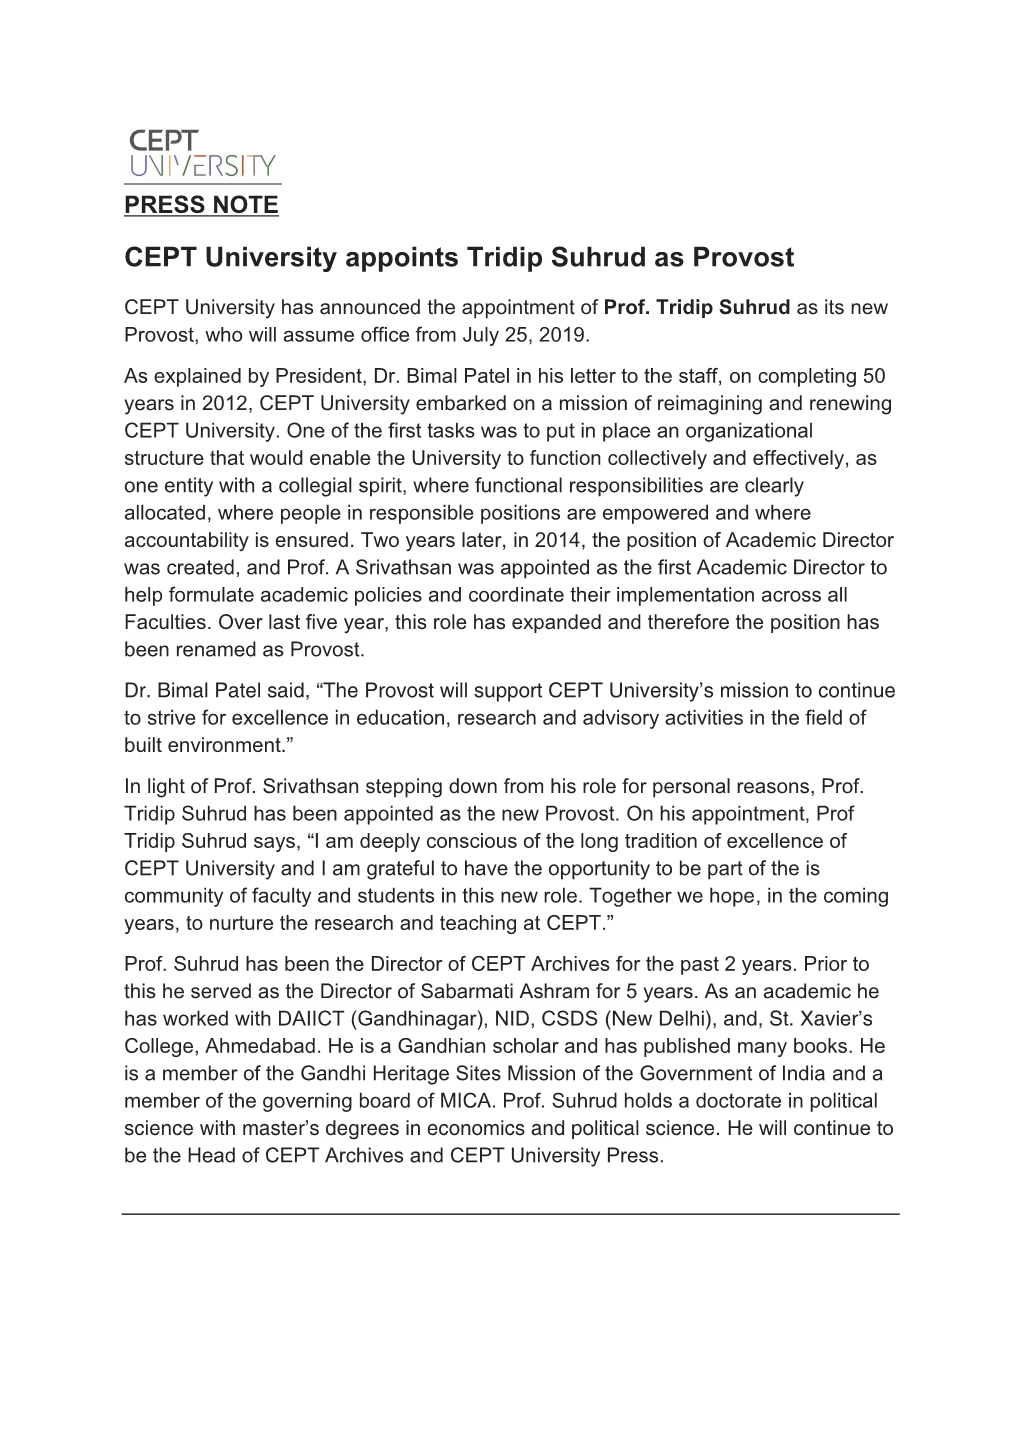 CEPT University Appoints Tridip Suhrud As Provost